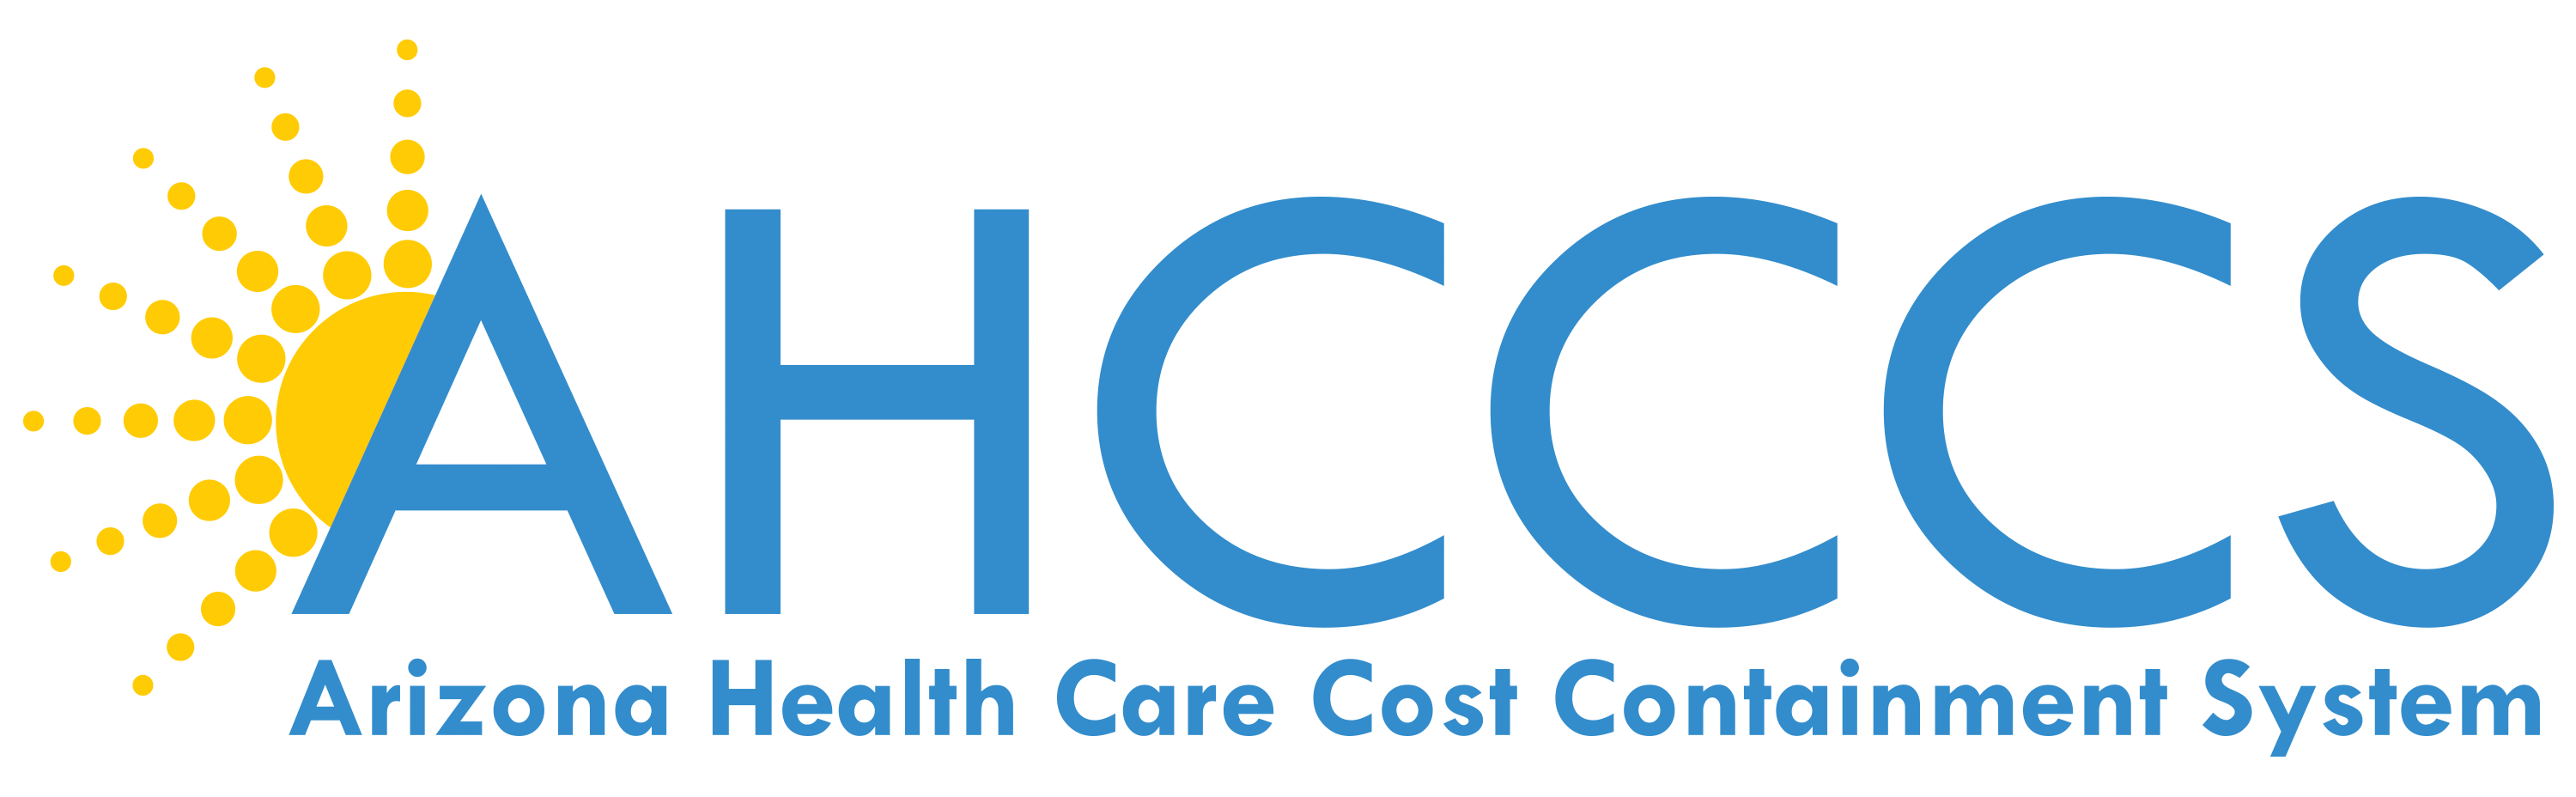 AHCCCS Complete Care To Integrate Health Care Services For 1.5 Million